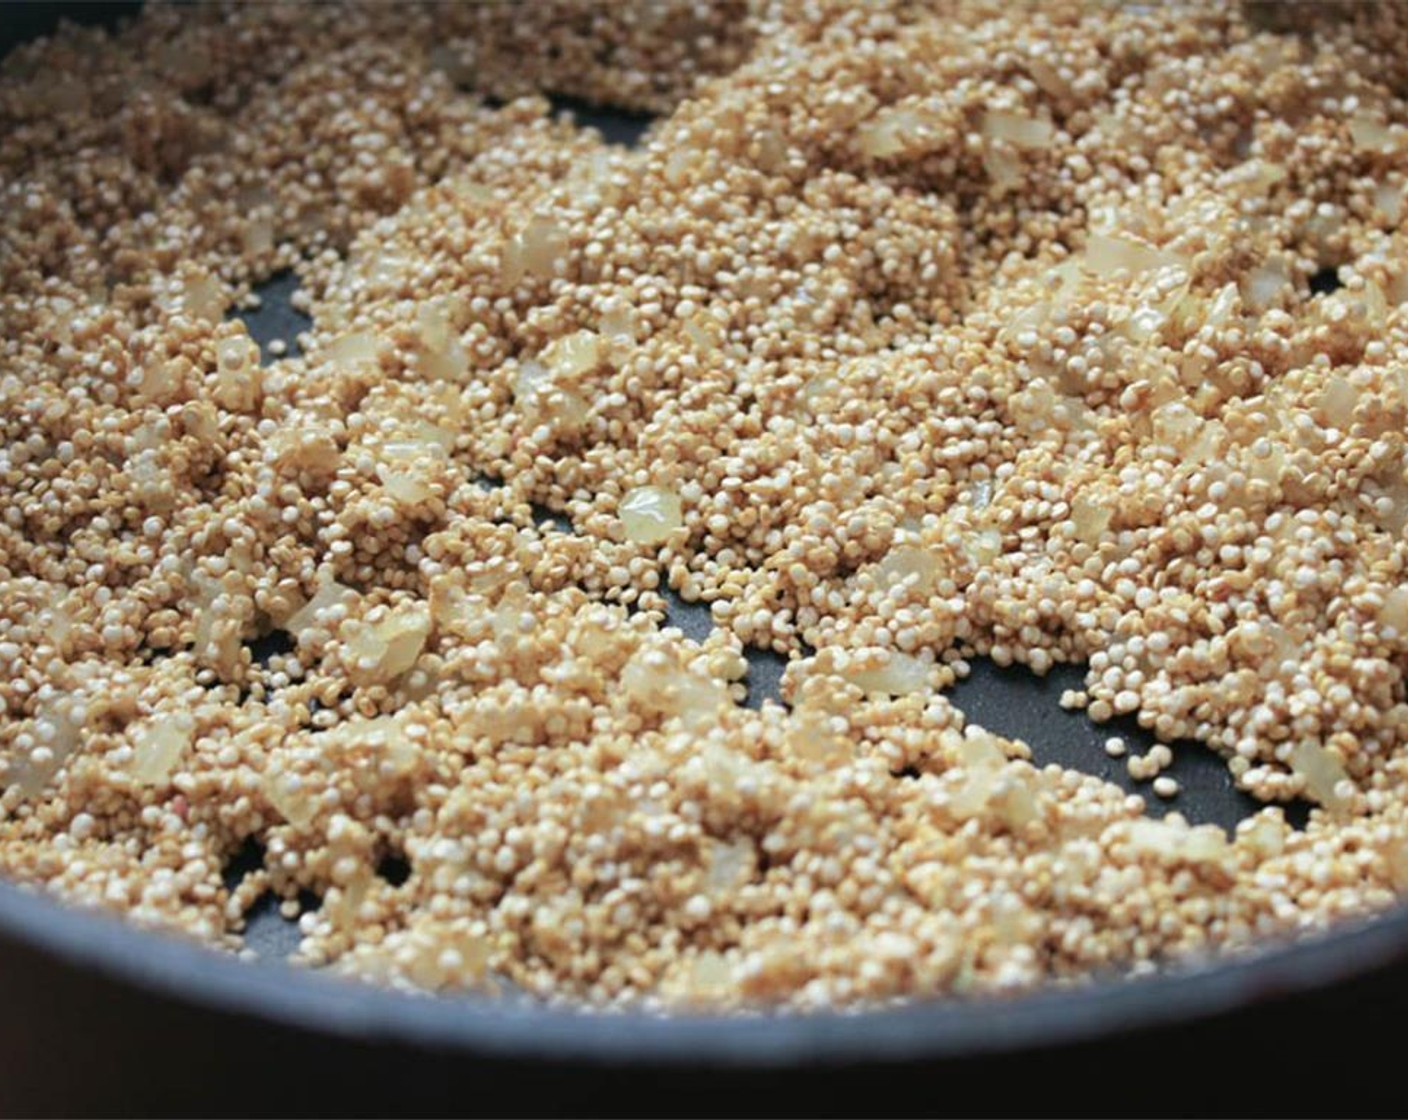 step 10 Add the Quinoa (1 cup) to the pan and stir to coat with oil. Cook for 2 minutes, stirring constantly, until the grains are lightly toasted.